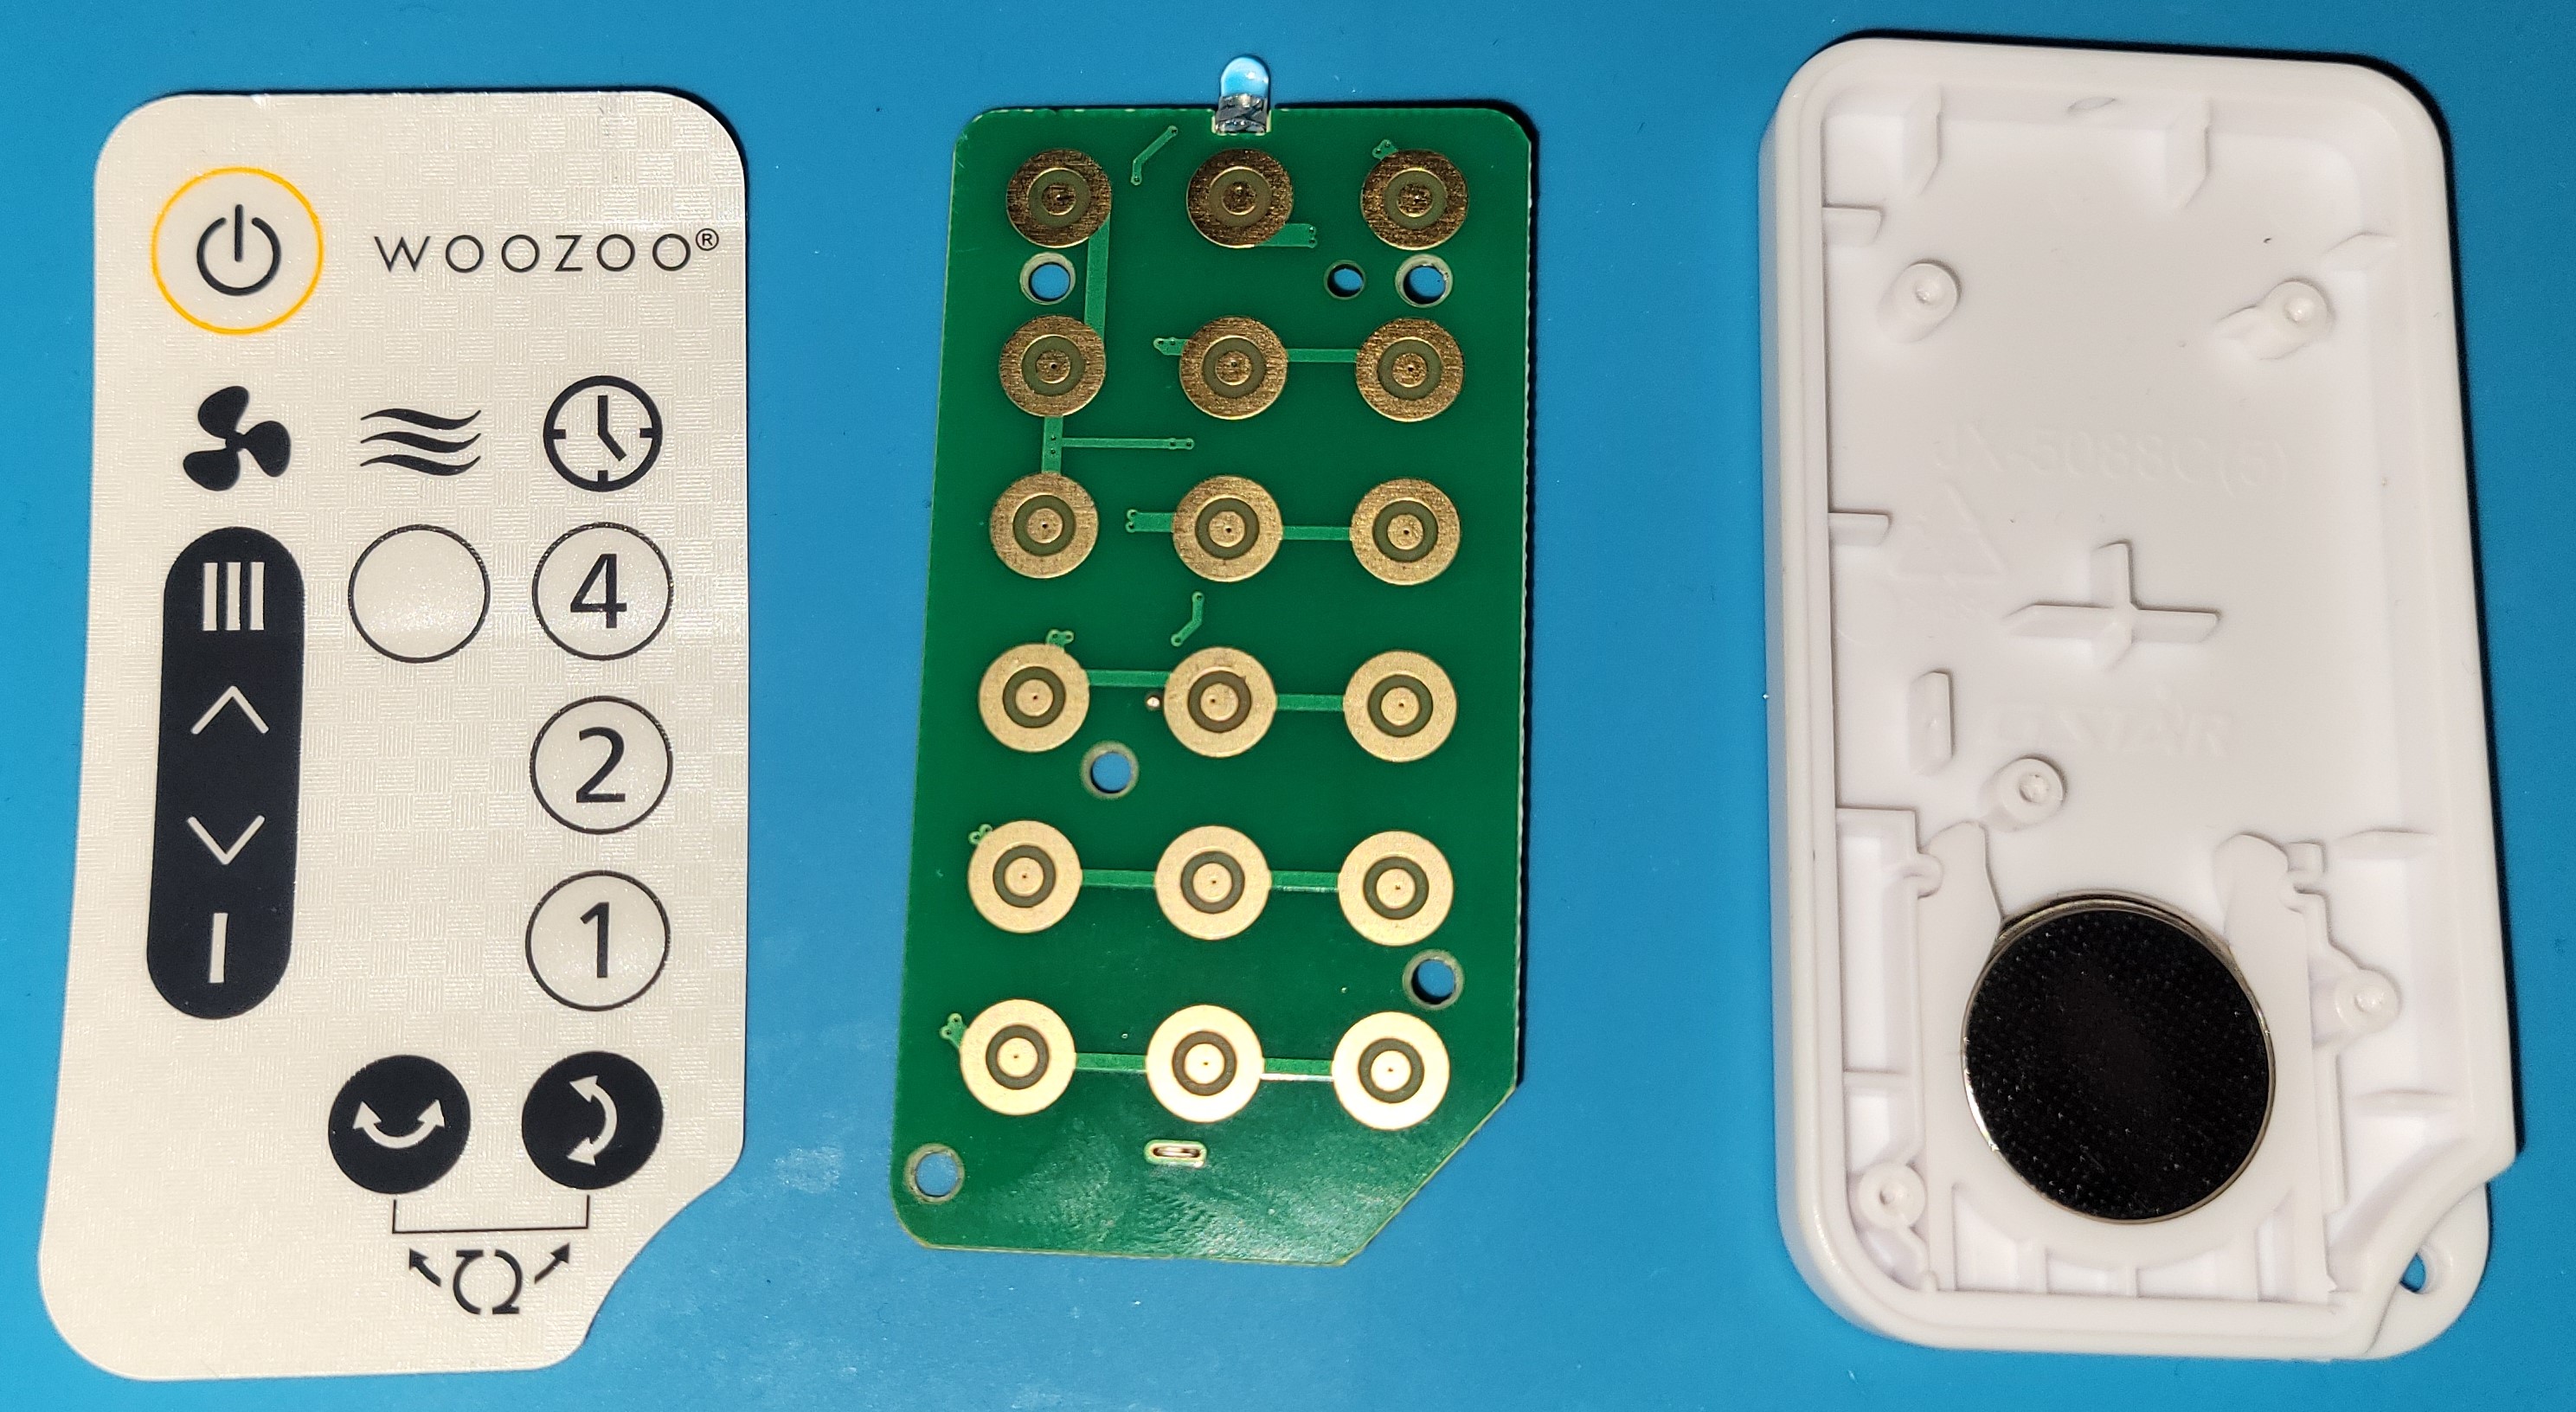 disassembled remote